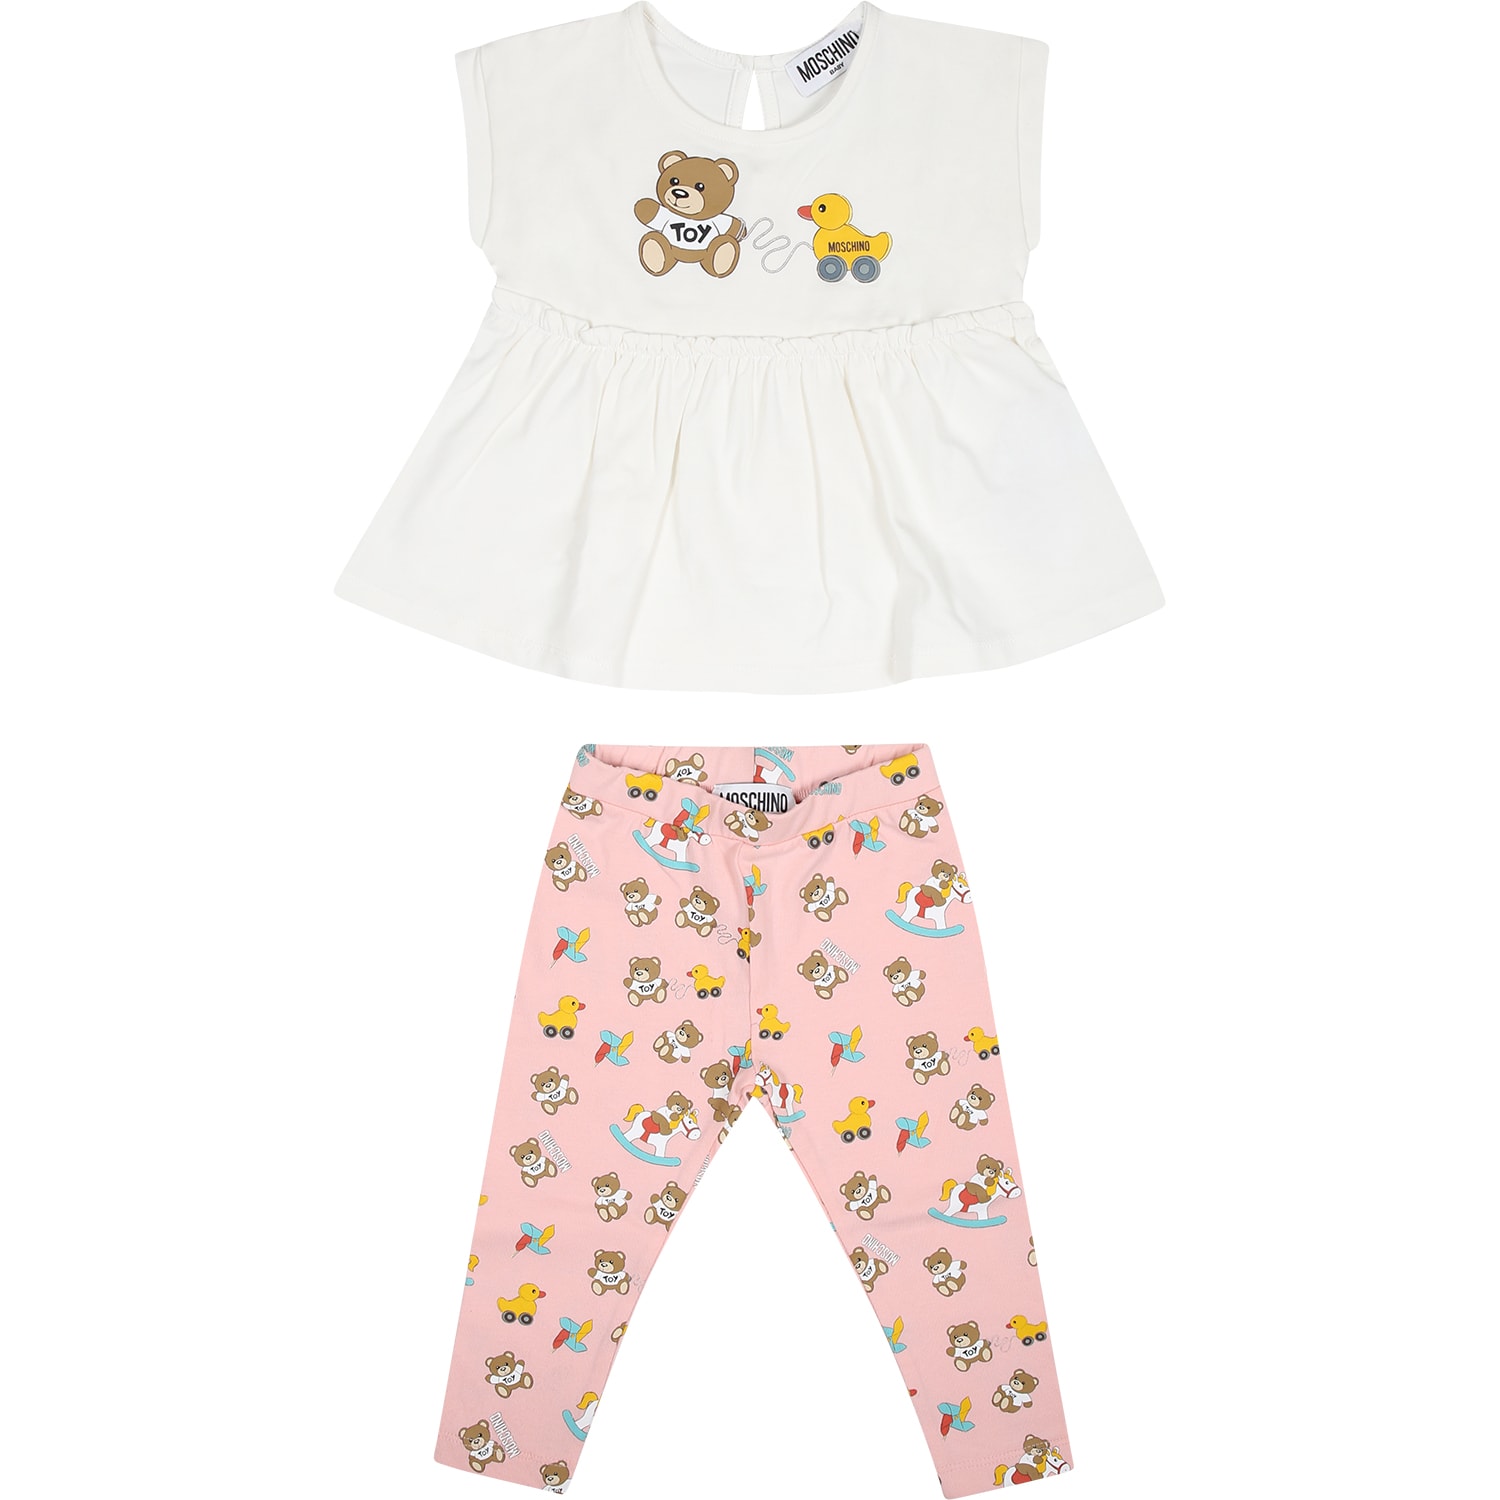 Moschino Multicolor Set For Baby Girl With Teddy Bear And Ducks